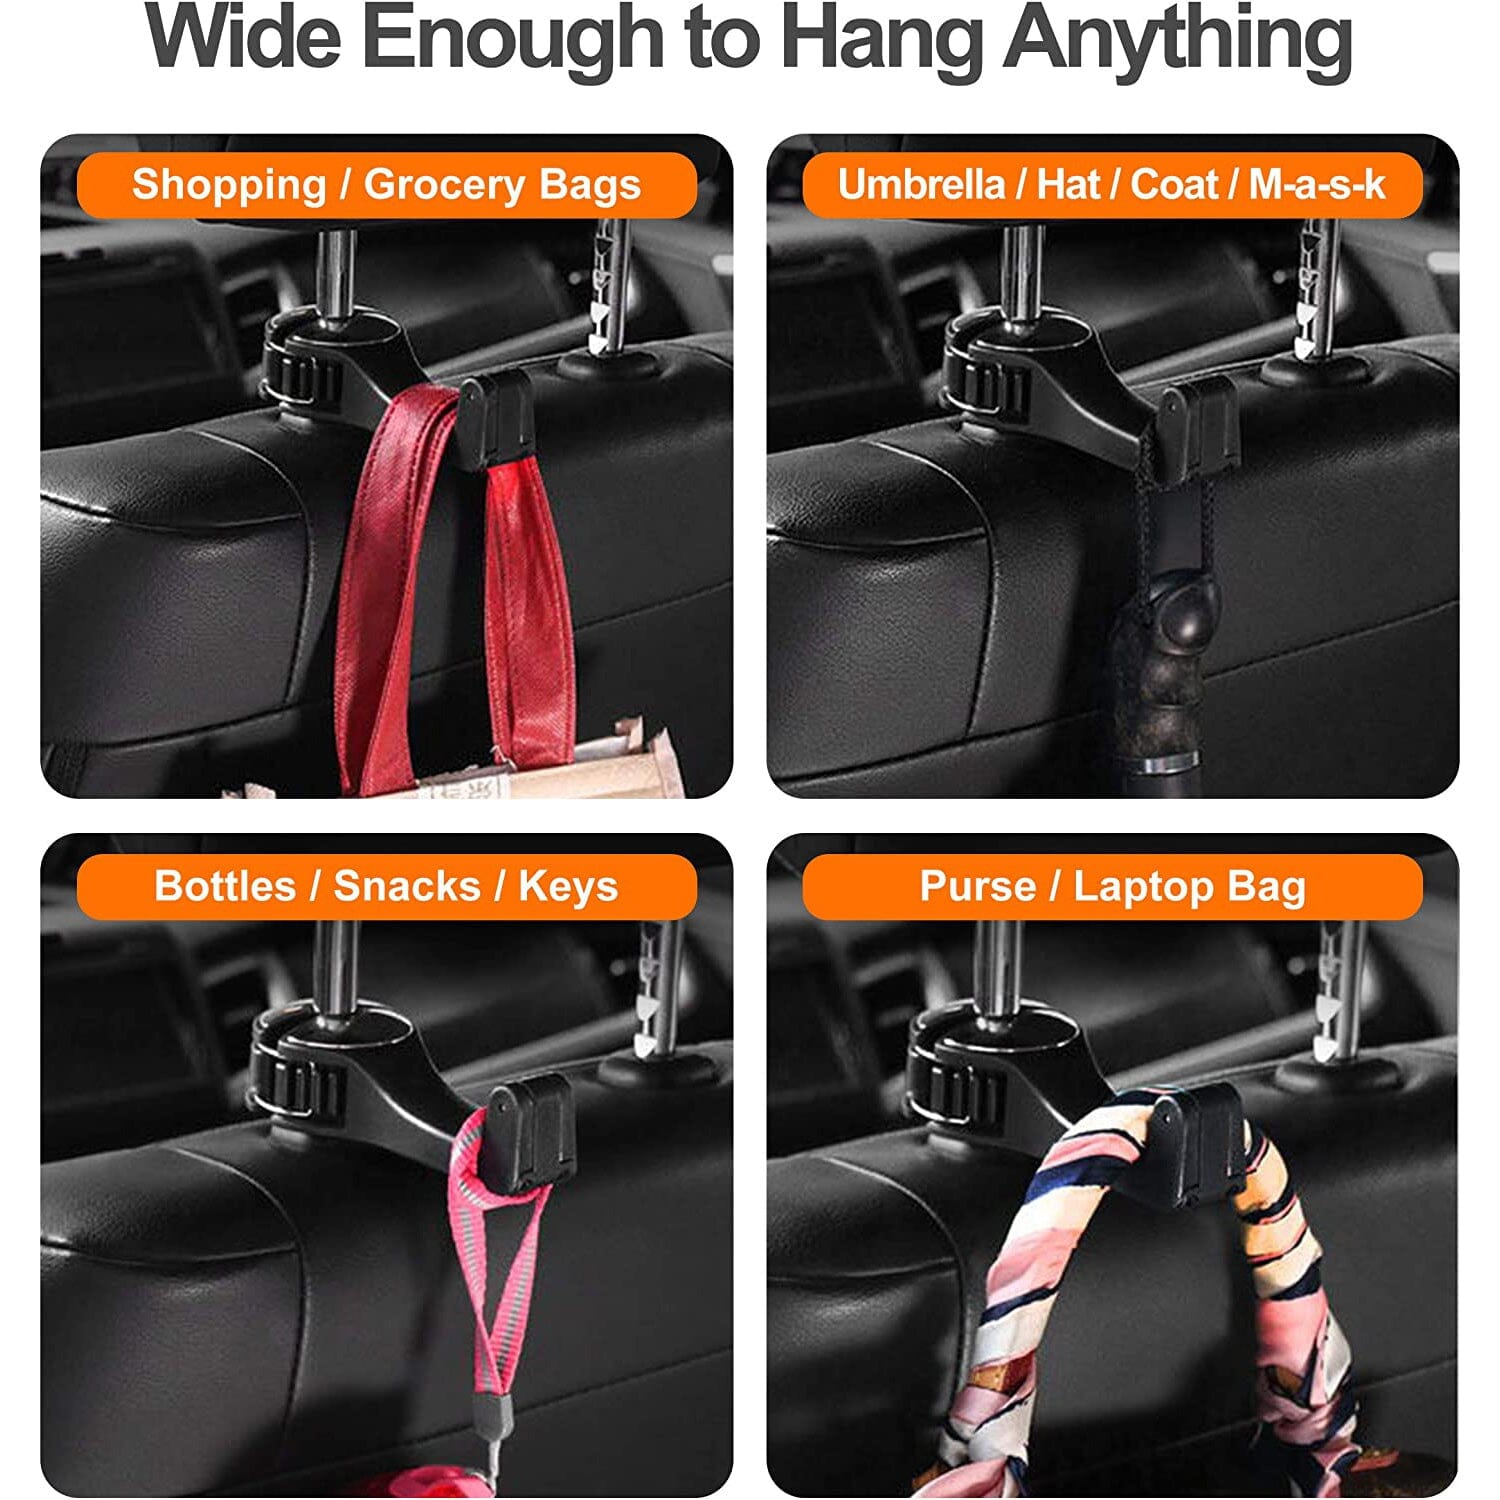 2-Pack: 2-in-1 Car Seat Hooks for Purses and Bags with Phone Holder